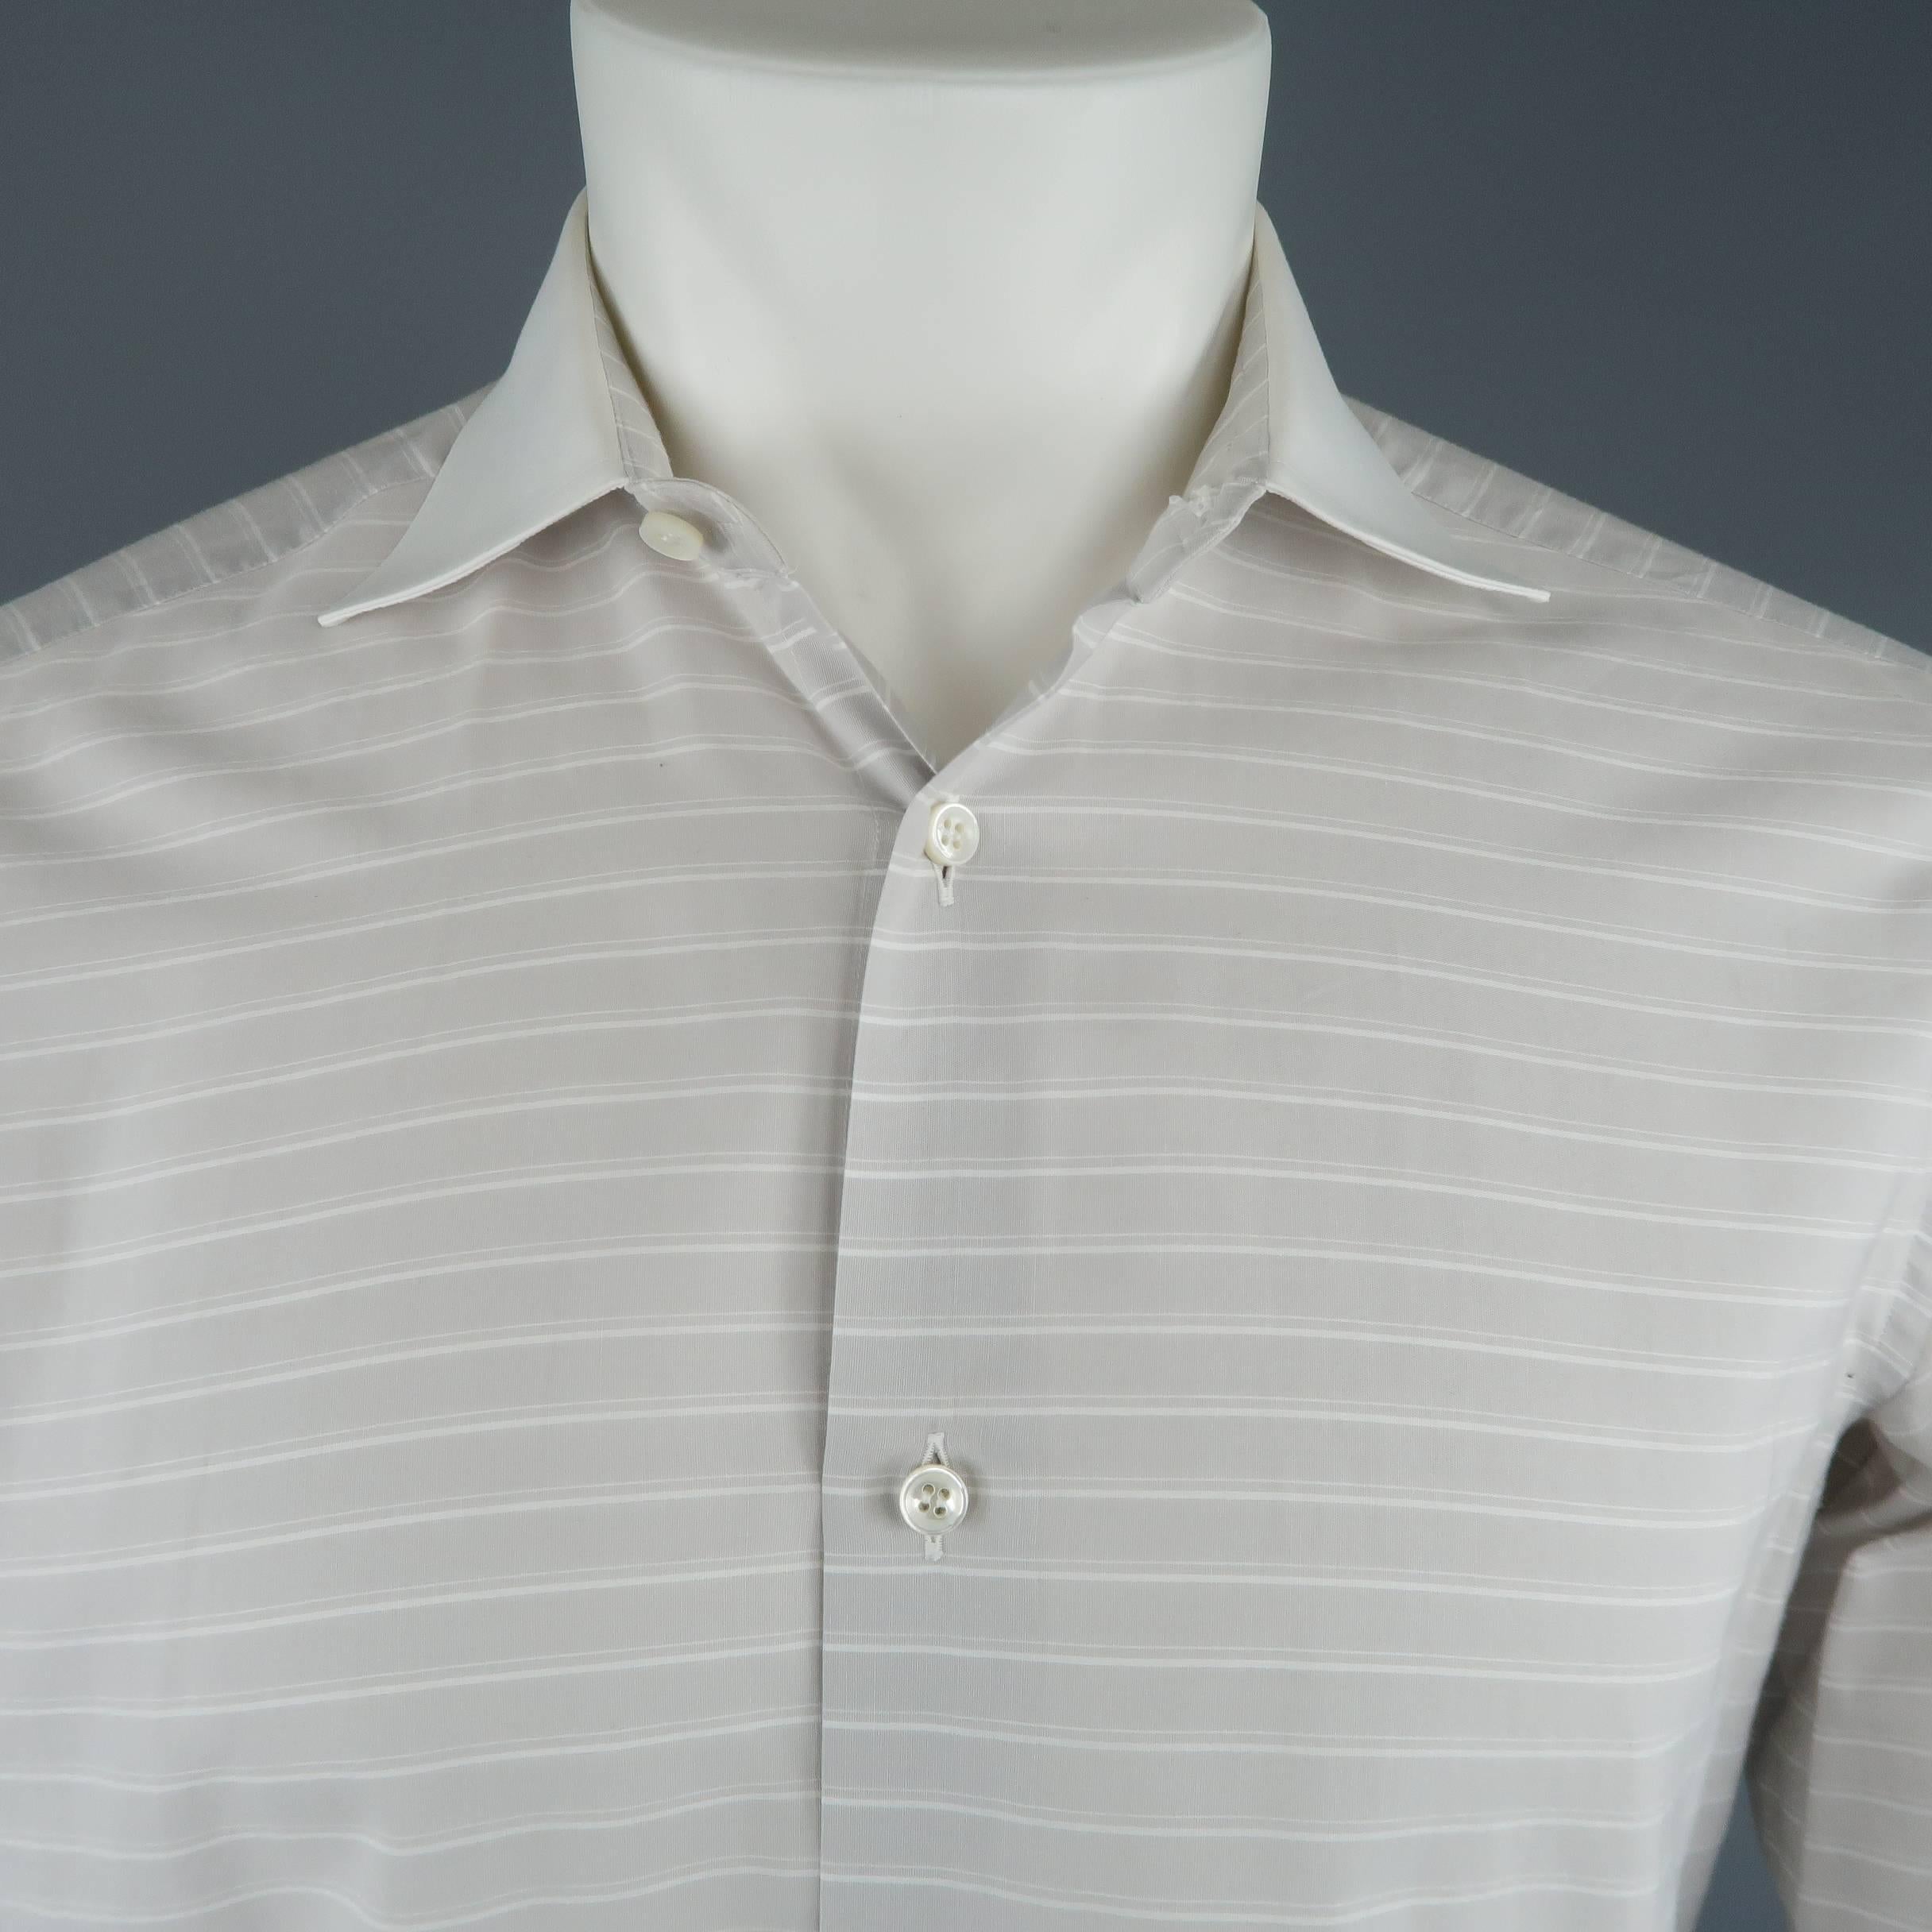 Classic BRIONI dress shirt comes in striped cotton with a spread contrast collar and French cuffs. Cuff links not included. Made in Italy.
 
Good Pre-Owned Condition.
Marked: R 15.5
 
Measurements:
 
Shoulder: 15 in.
Chest: 44 in.
Sleeve: 23